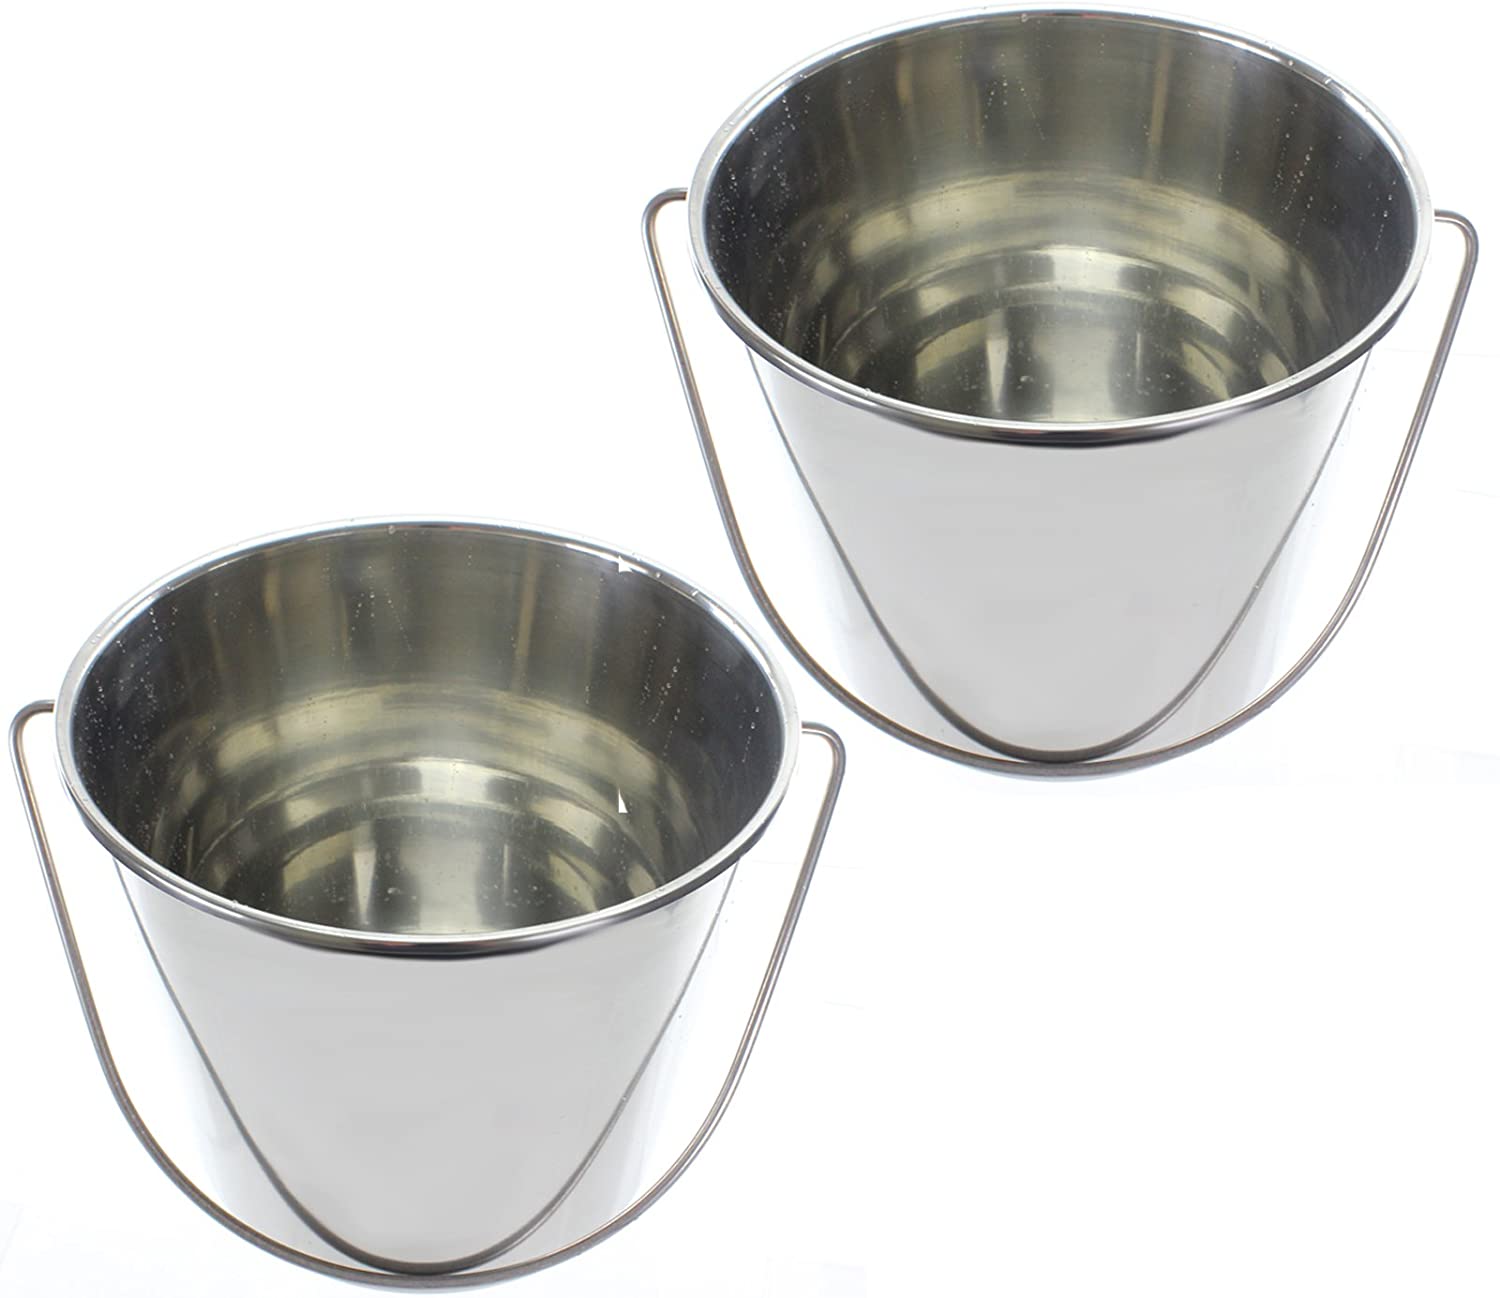 Stainless Steel Bucket, Pack of 2 Buckets